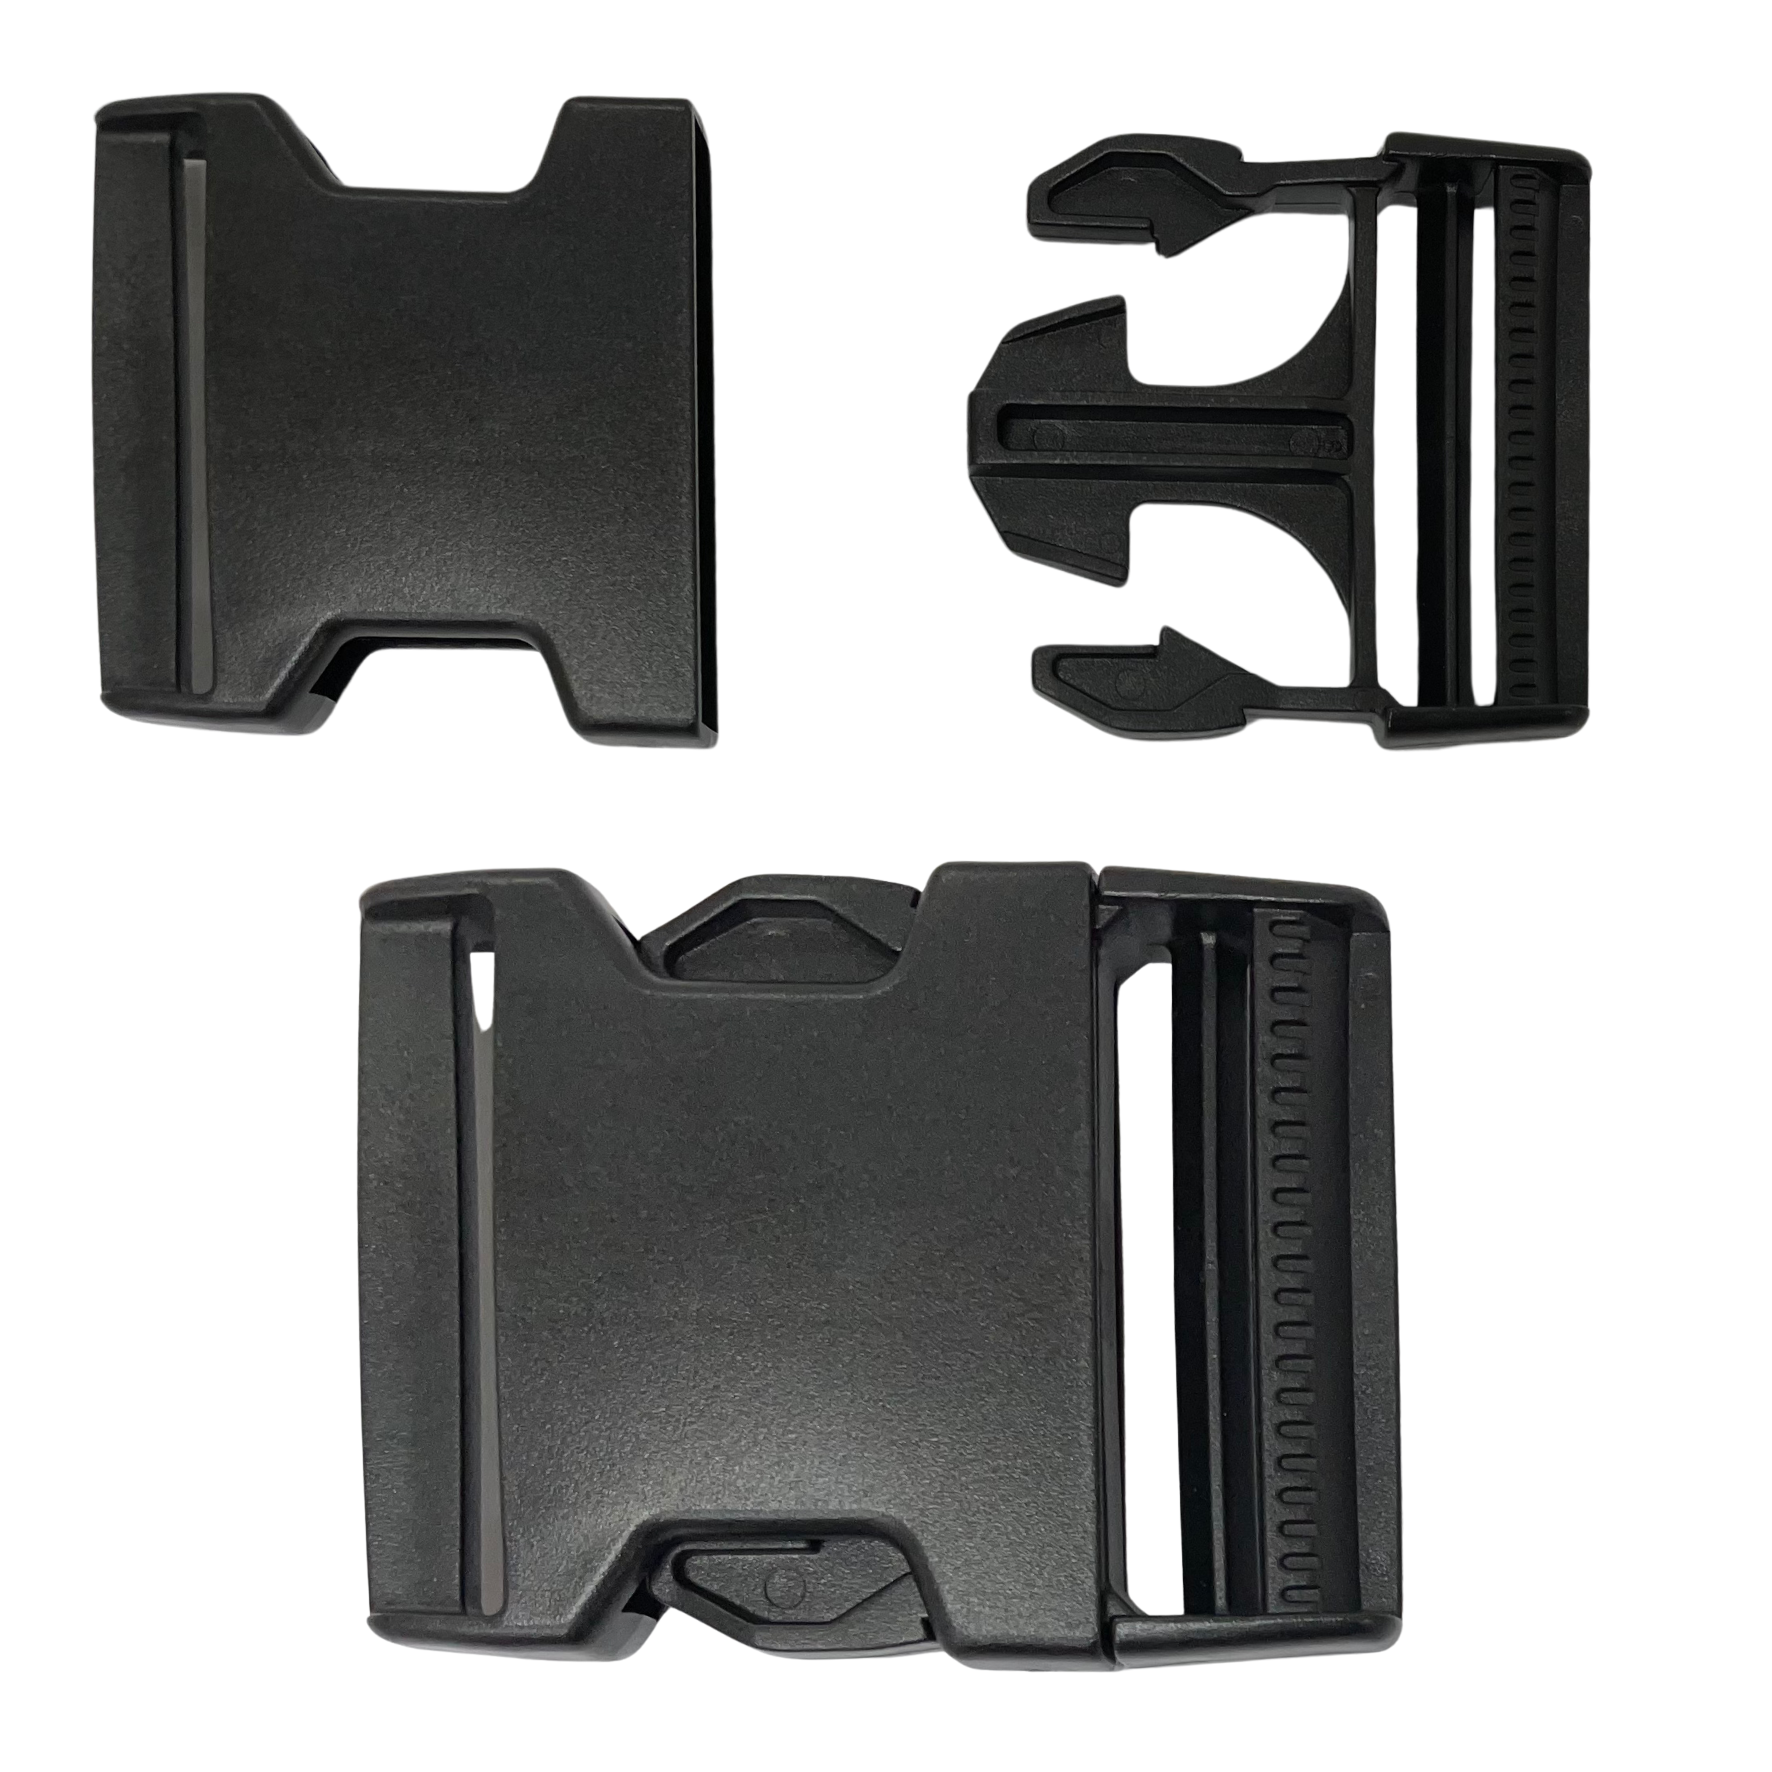 BULK PACKS - PLASTIC INJECTED 50MM QUICK RELEASE BUCKLE